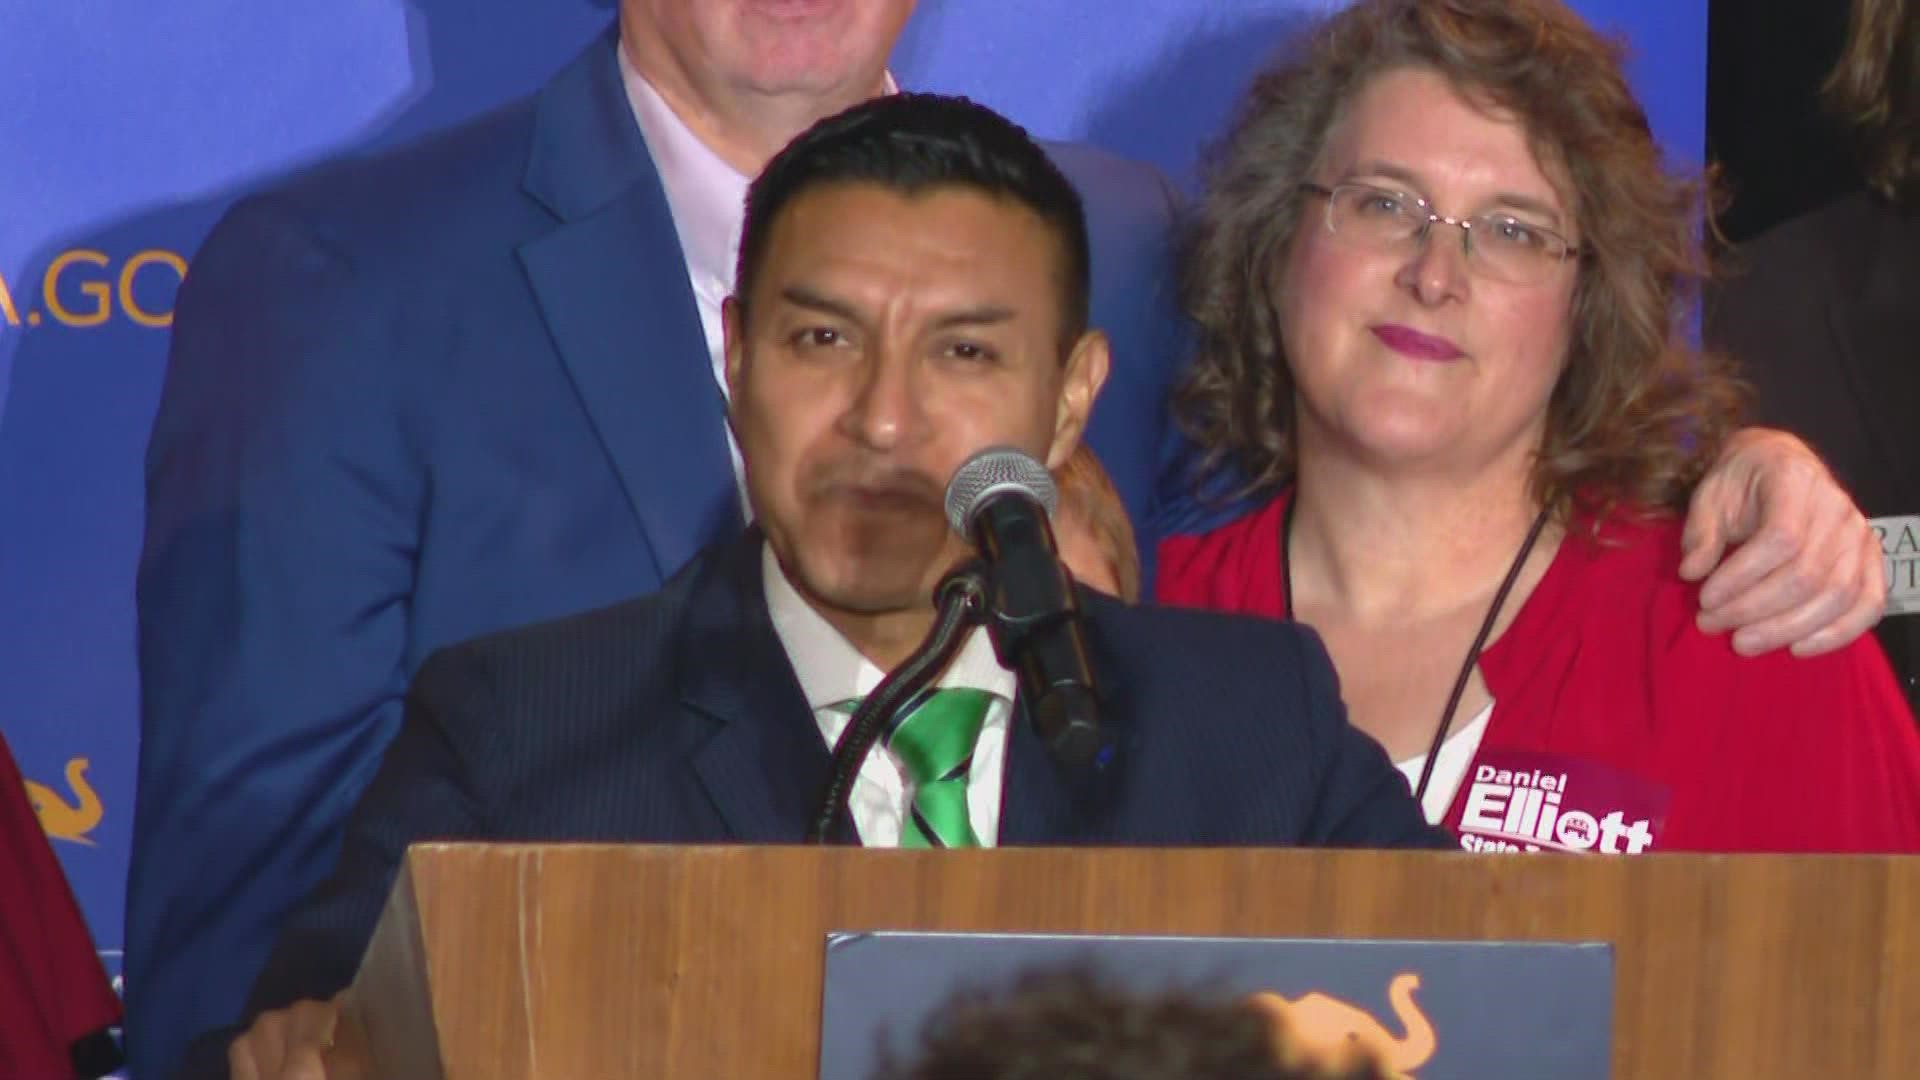 Morales won election to Indiana Secretary of State Tuesday.